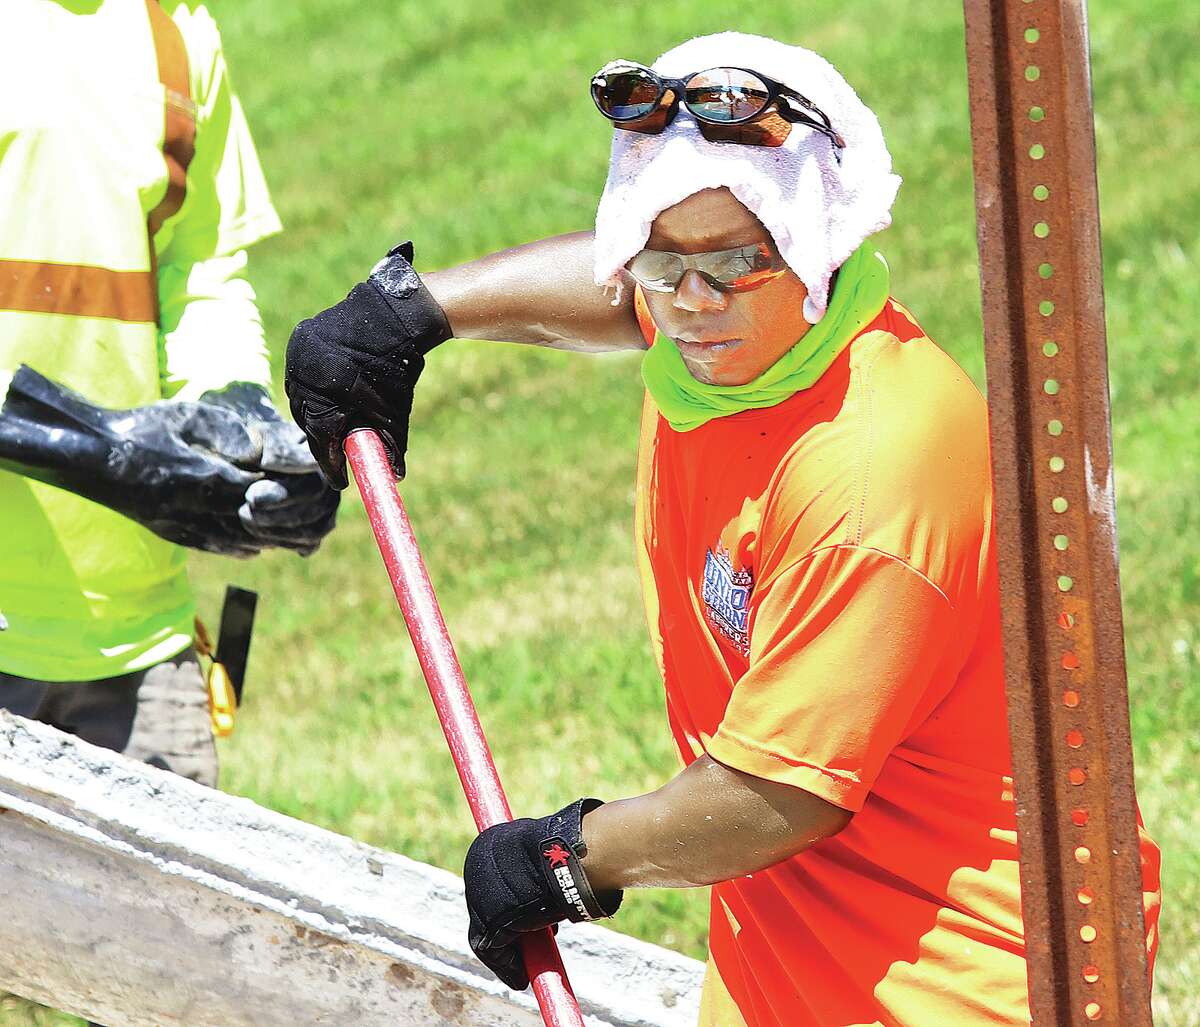 John Badman|The Telegraph A worker from a labor local uses a wet rag on his head to stay cool Wednesday while helping to pour a sidewalk in front of Alton Middle School. Summer heat and humidity were making outdoor chores unpleasant.